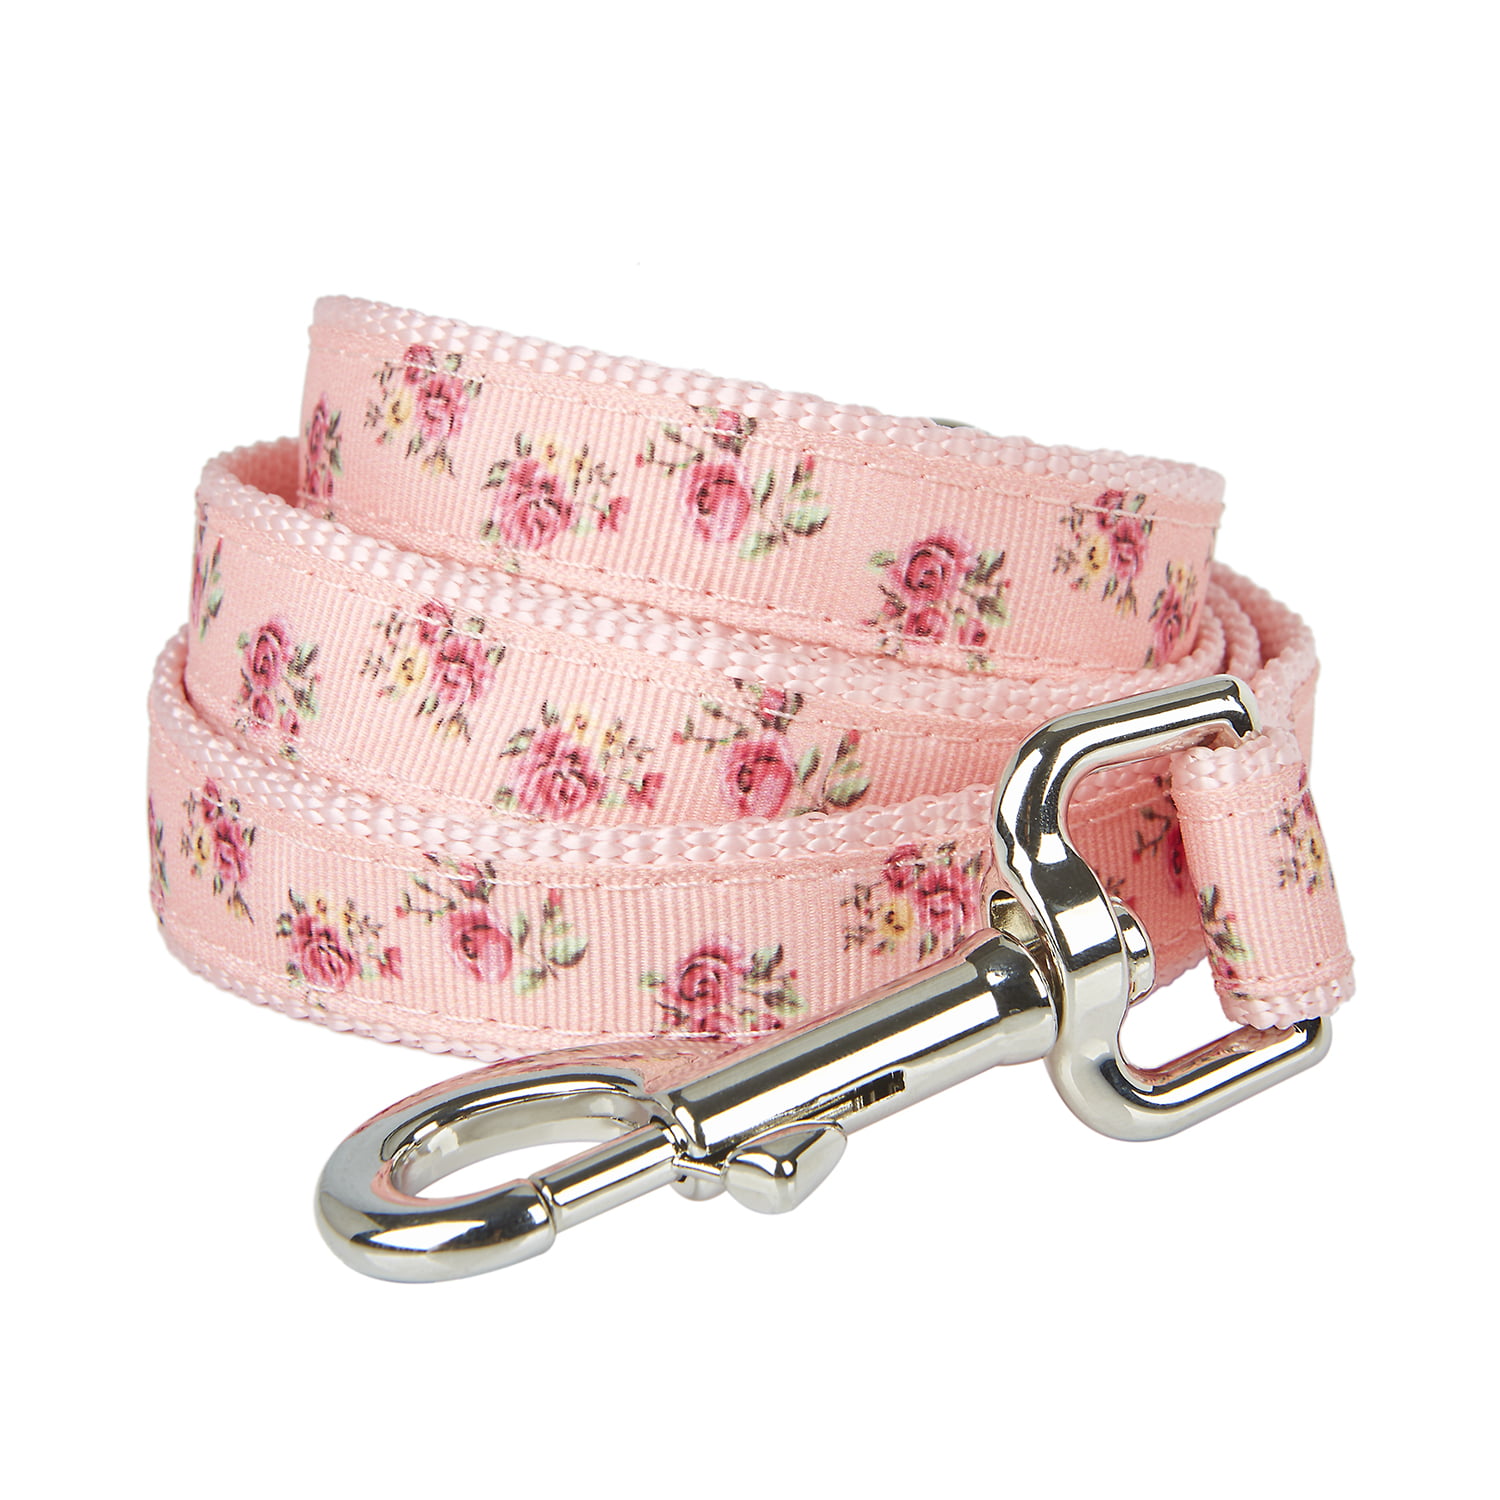 Lucky Love Dog Combo Set, Floral Dog Collar and Leash Set for Small Dogs,  Cute Girl Matching Collar & Leash Set, Part of Purchase Donated to Rescue